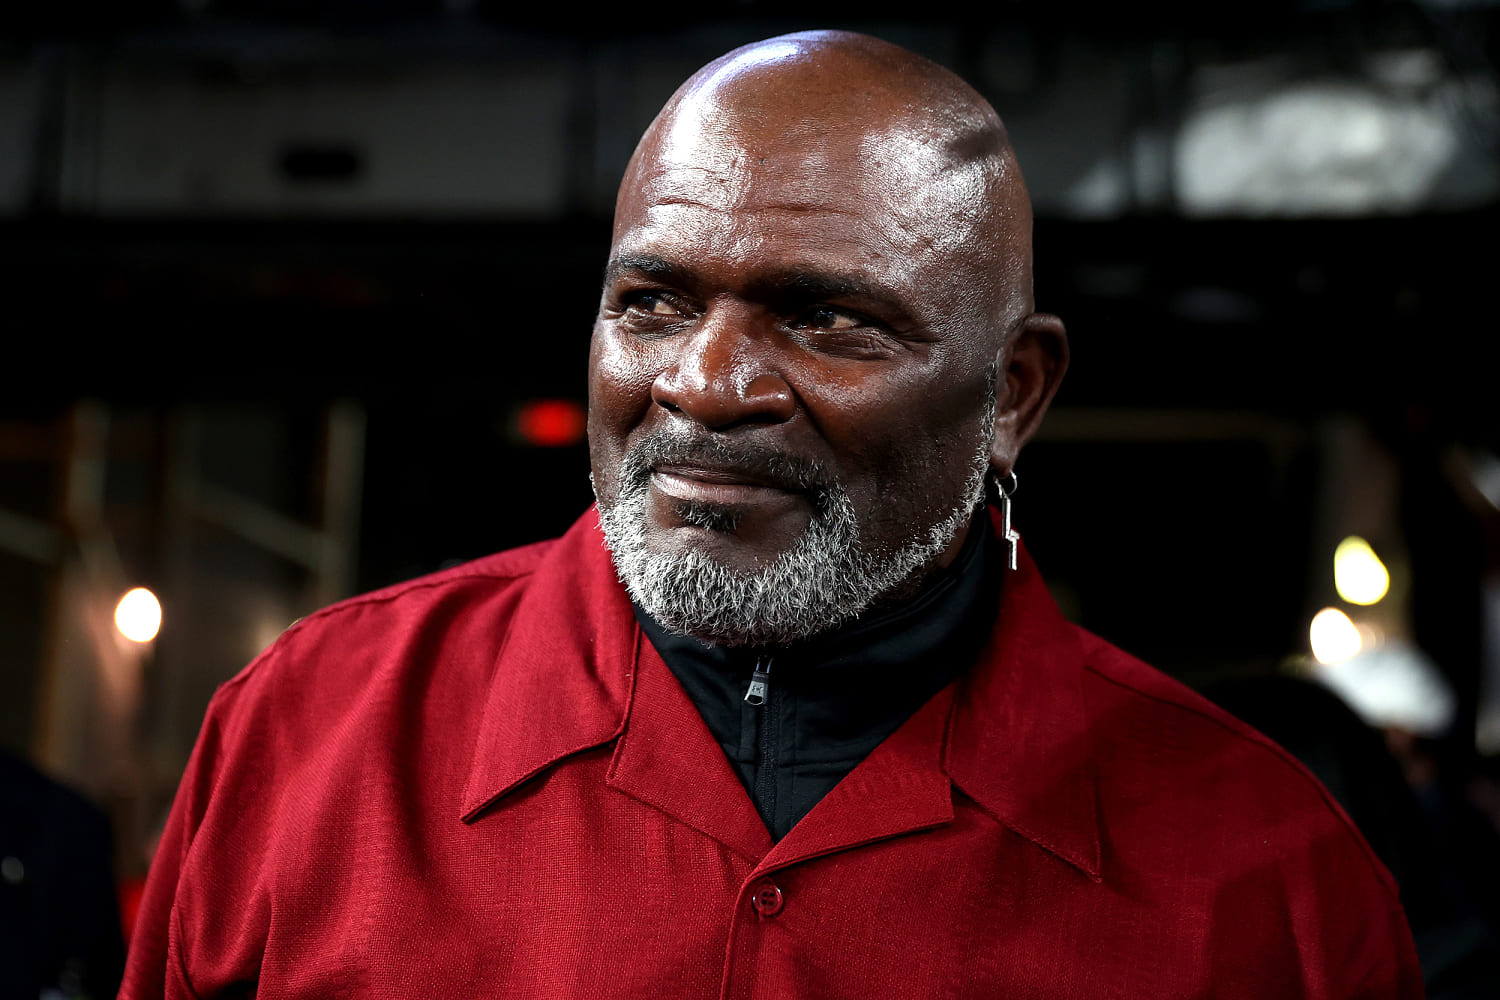 NFL legend Lawrence Taylor arrested and charged with failing to report move as sex offender again